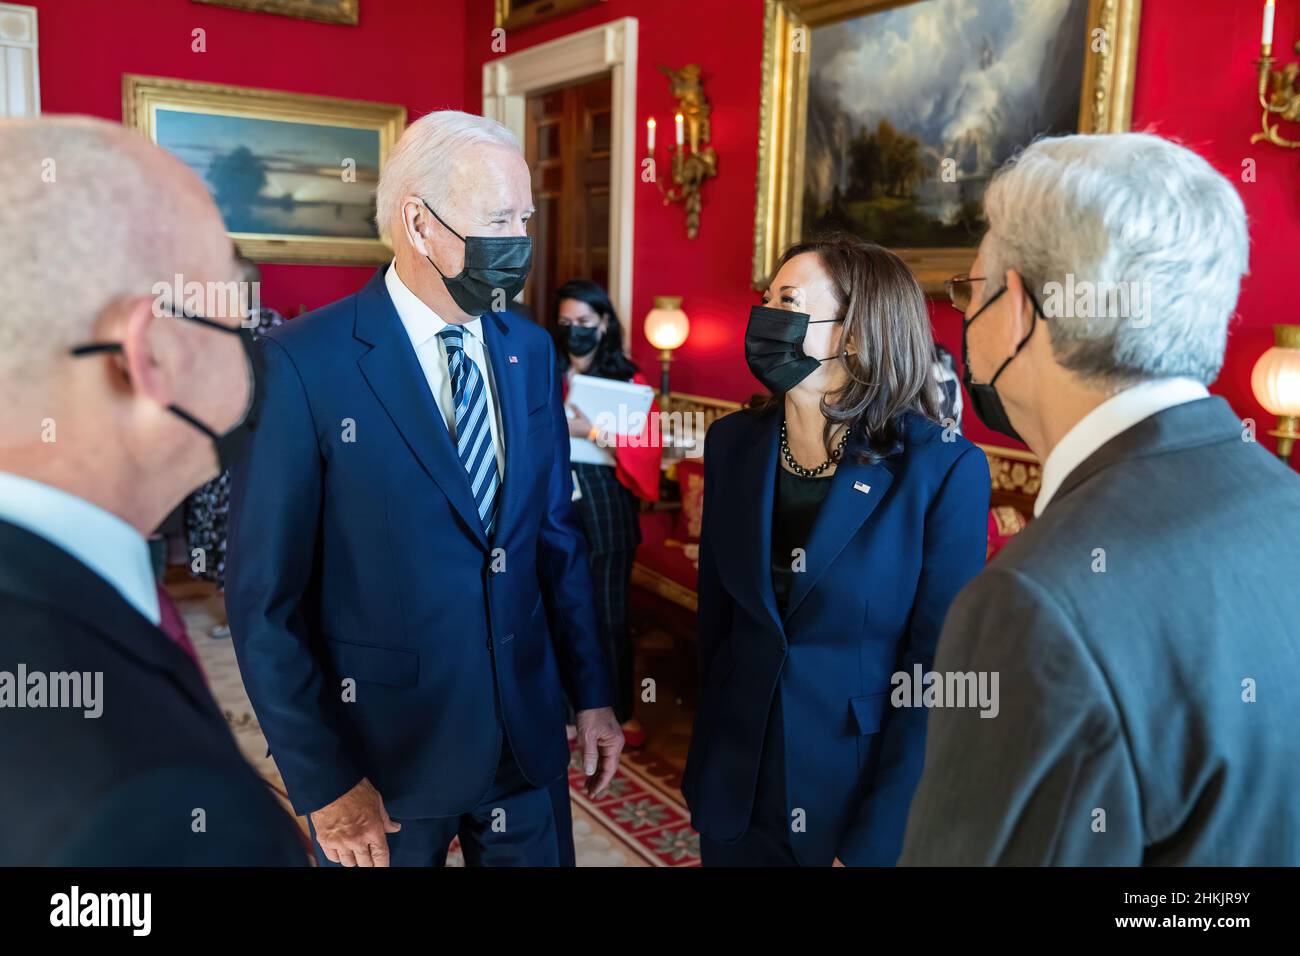 President Joe Biden talks with Vice President Kamala Harris, U.S. Attorney General Merrick Garland and Secretary of Homeland Security Alejandro Mayorkas in the Red Room of the White House, Thursday, November 18, 2021, before signing the COPS Counseling Act, the Protecting America’s First Responders Act of 2021 and the Jaime Zapata and Victor Avila Federal Officers and Employees Protection Act at an event in the State Dining Room.  (Official White House Photo by Adam Schultz) Stock Photo